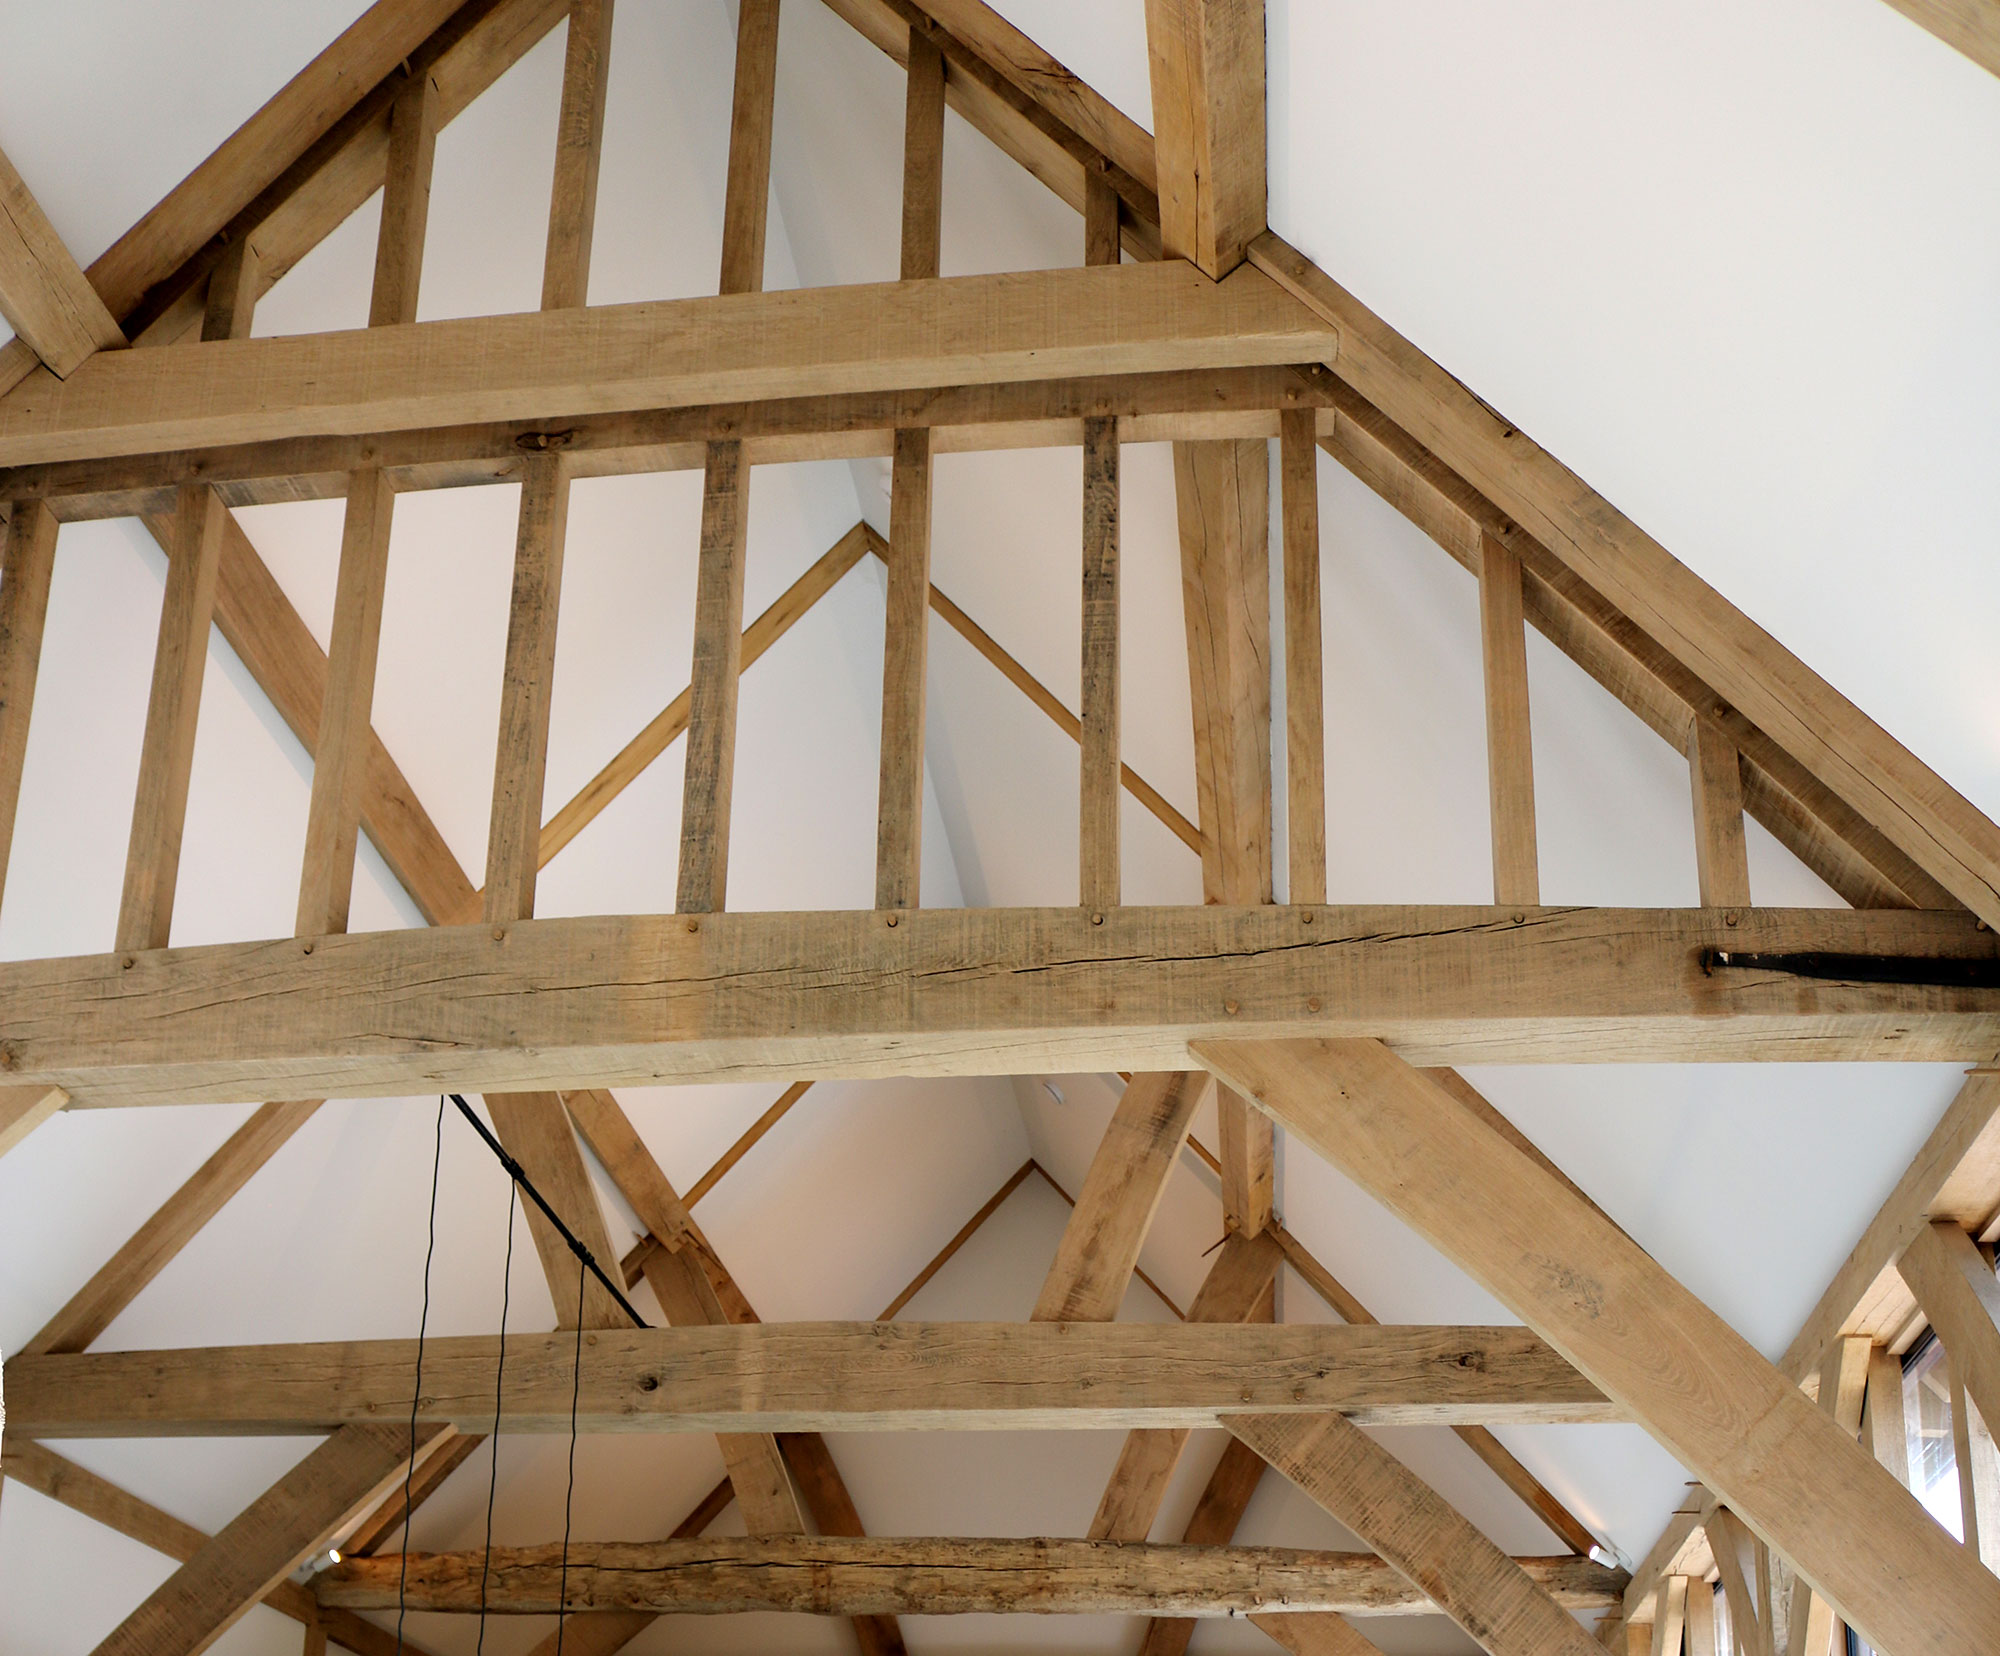 The timber roof trusses after restoration